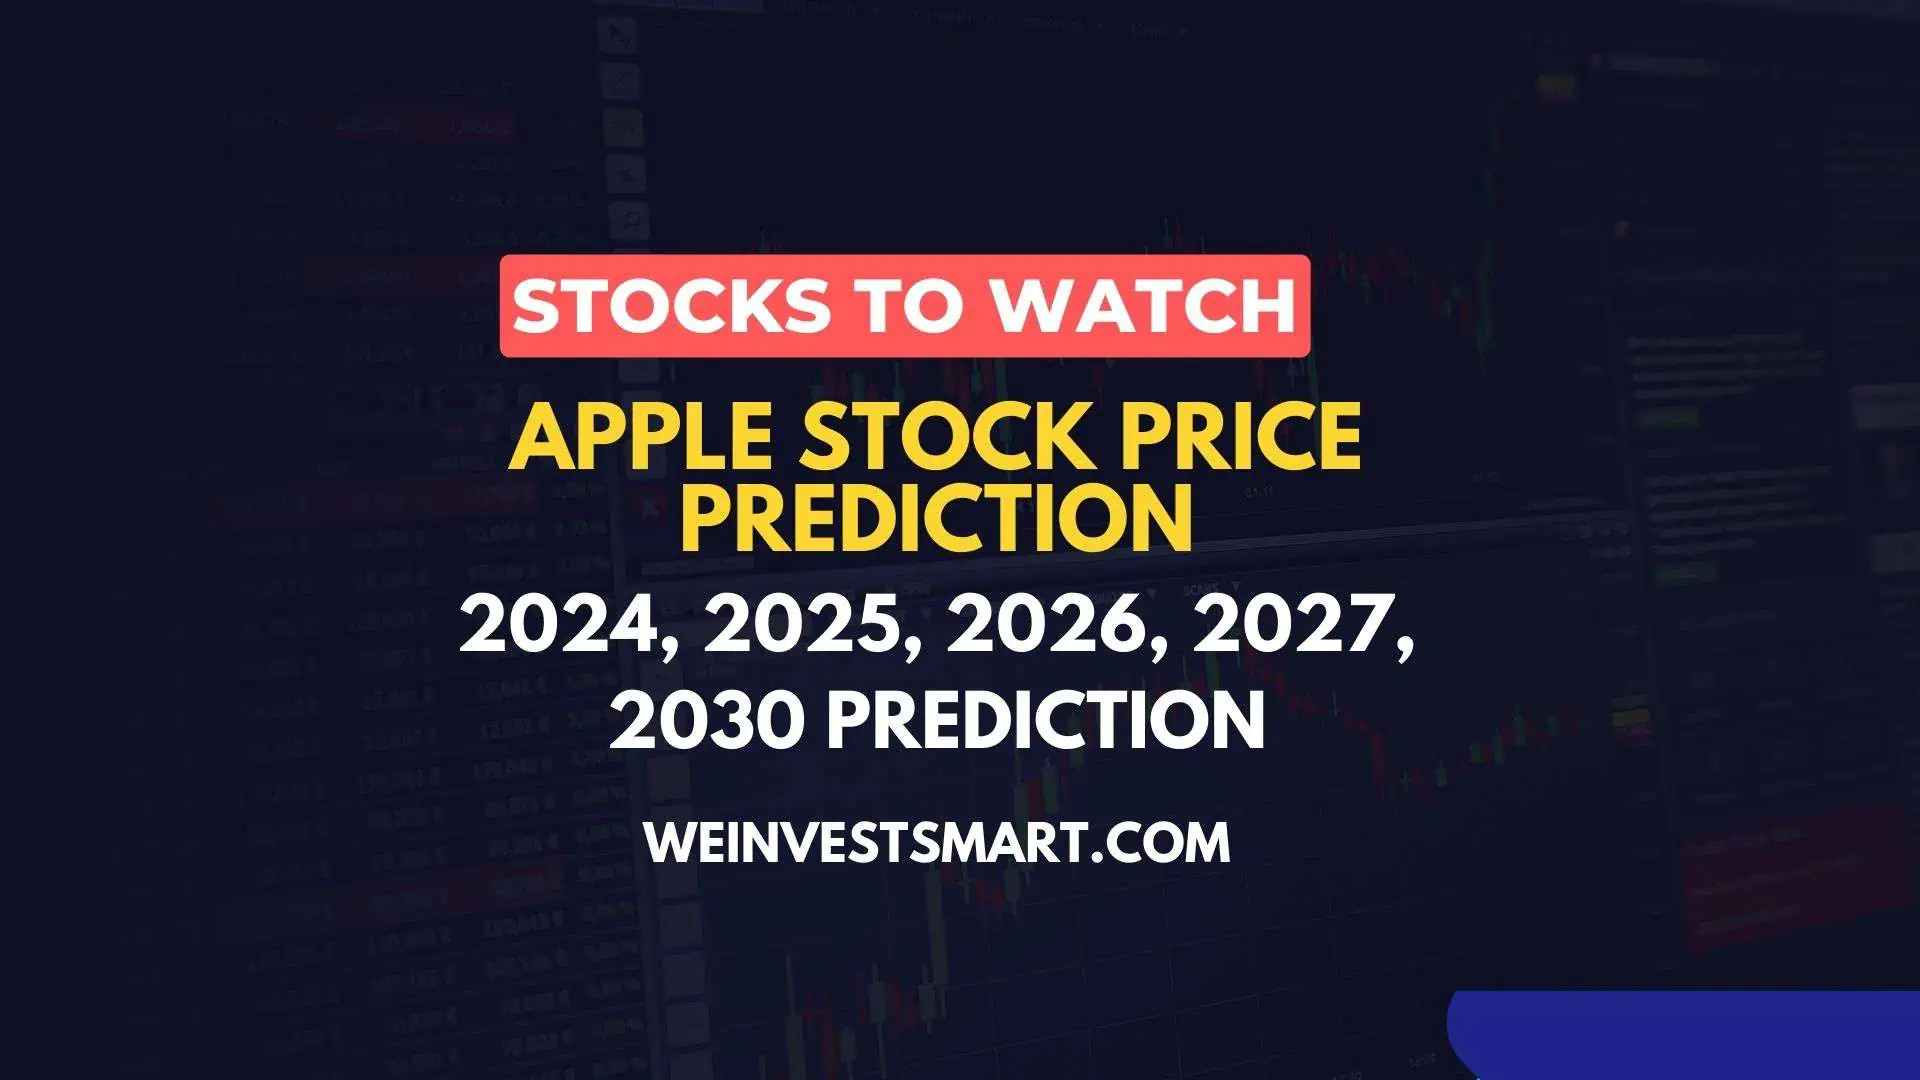 Apple Stock Price Prediction 2024, 2025, 2026, 2027, 2030 And Long Term